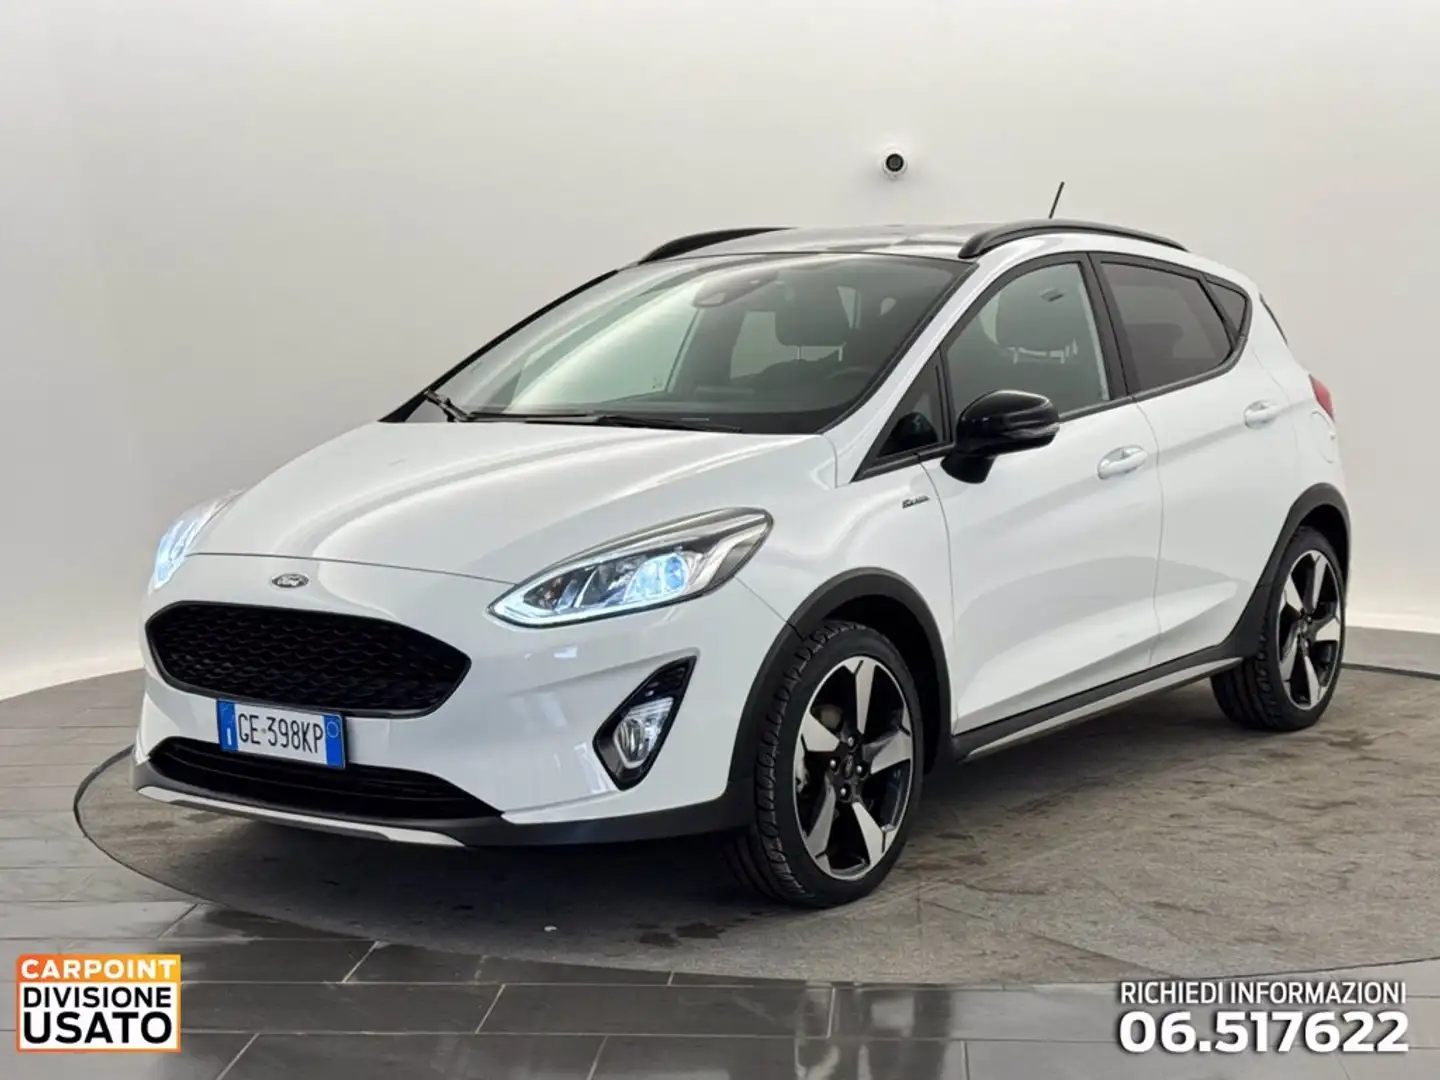 Ford Fiesta active 1.0 ecoboost h s&s 125cv my20.75 Bianco - 1